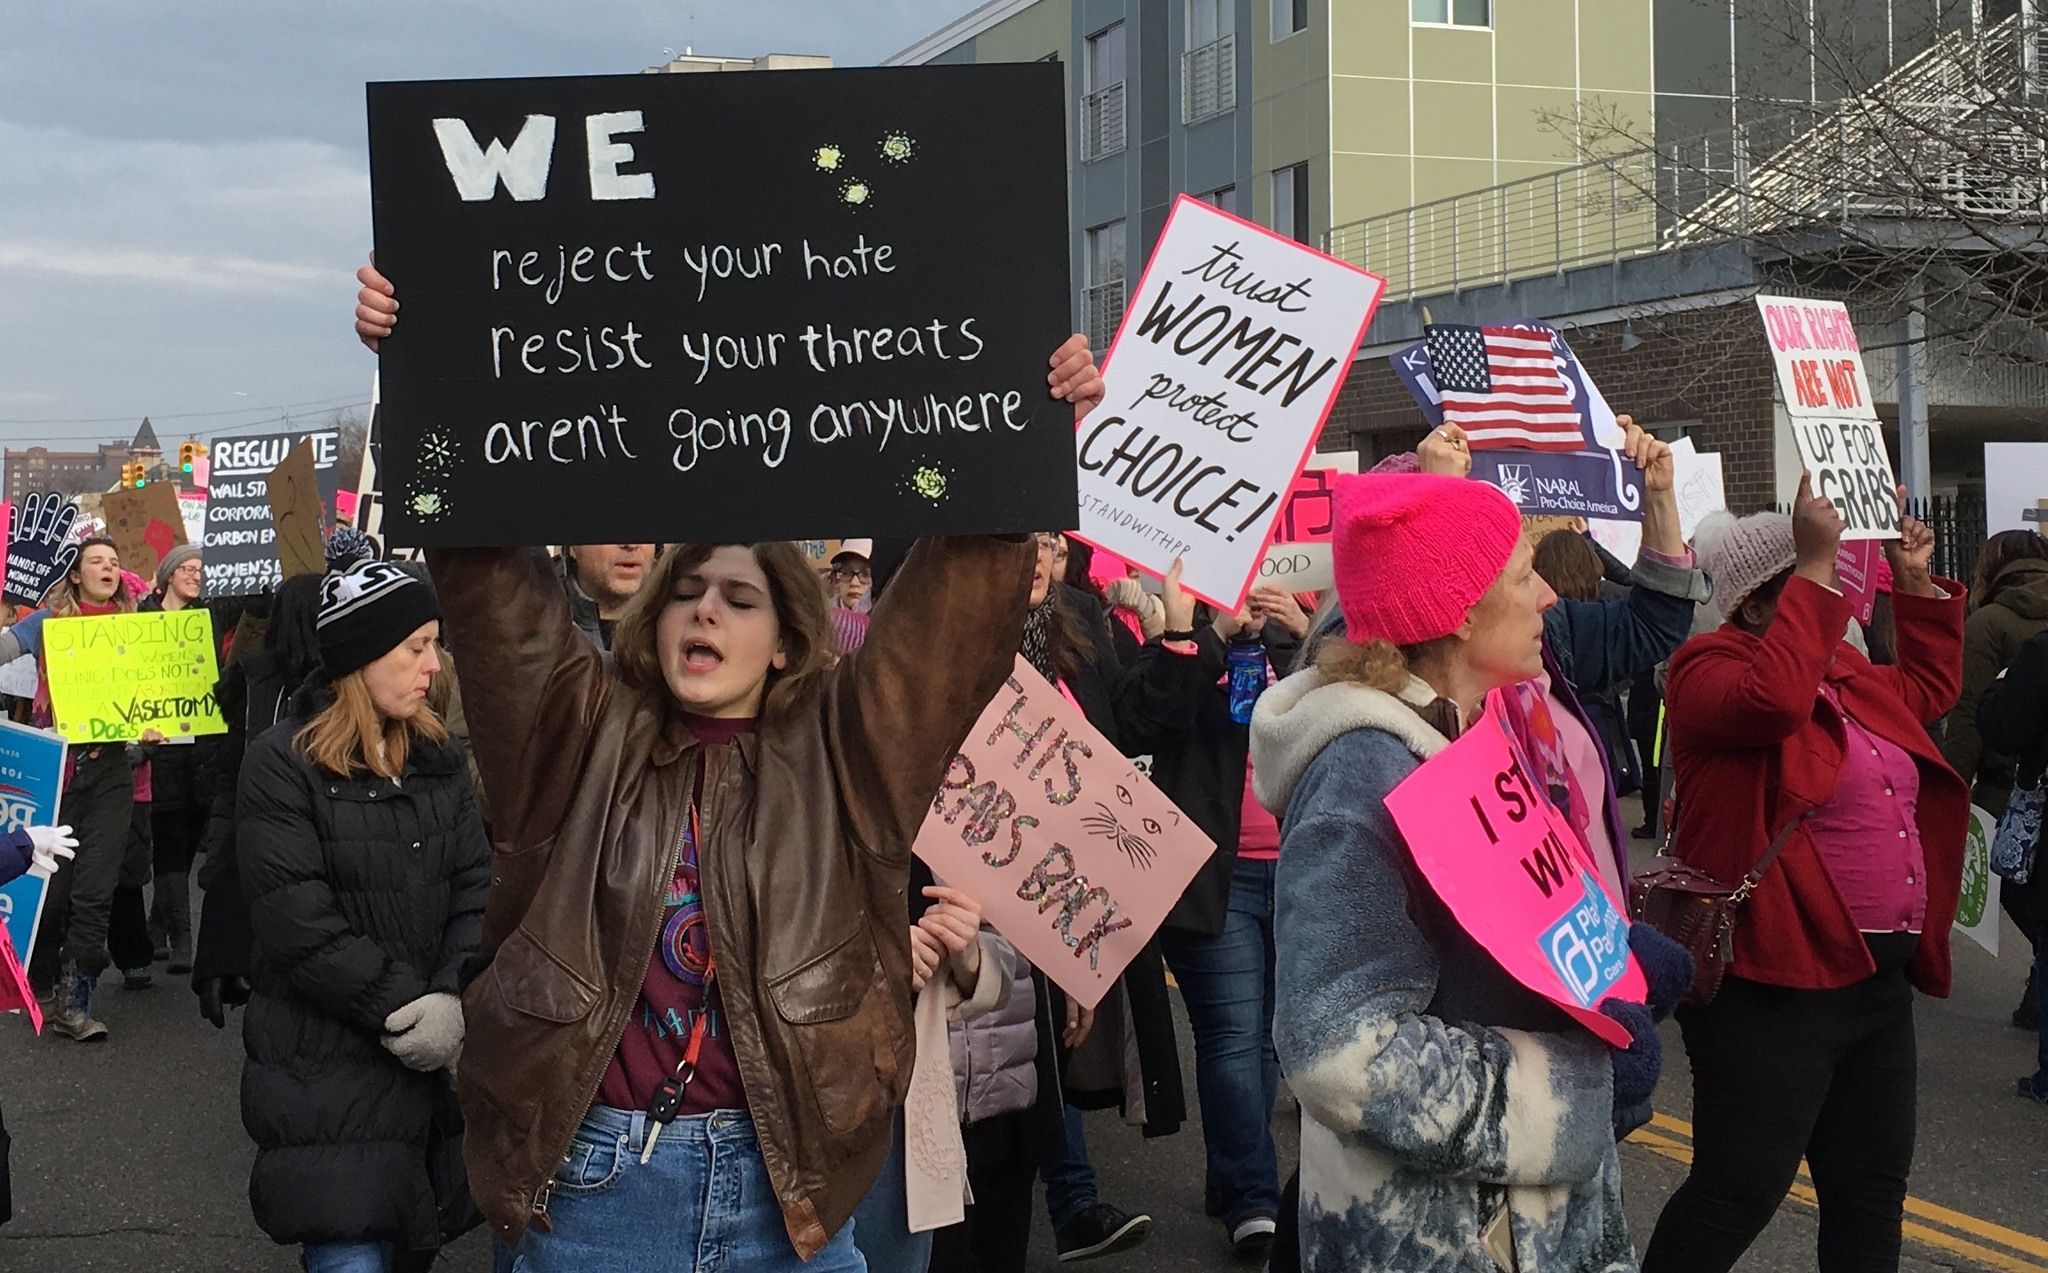 People march in support of Planned Parenthood in Detroit on Saturday. The event drew more than 300 people. (Ed White/The Associated Press)